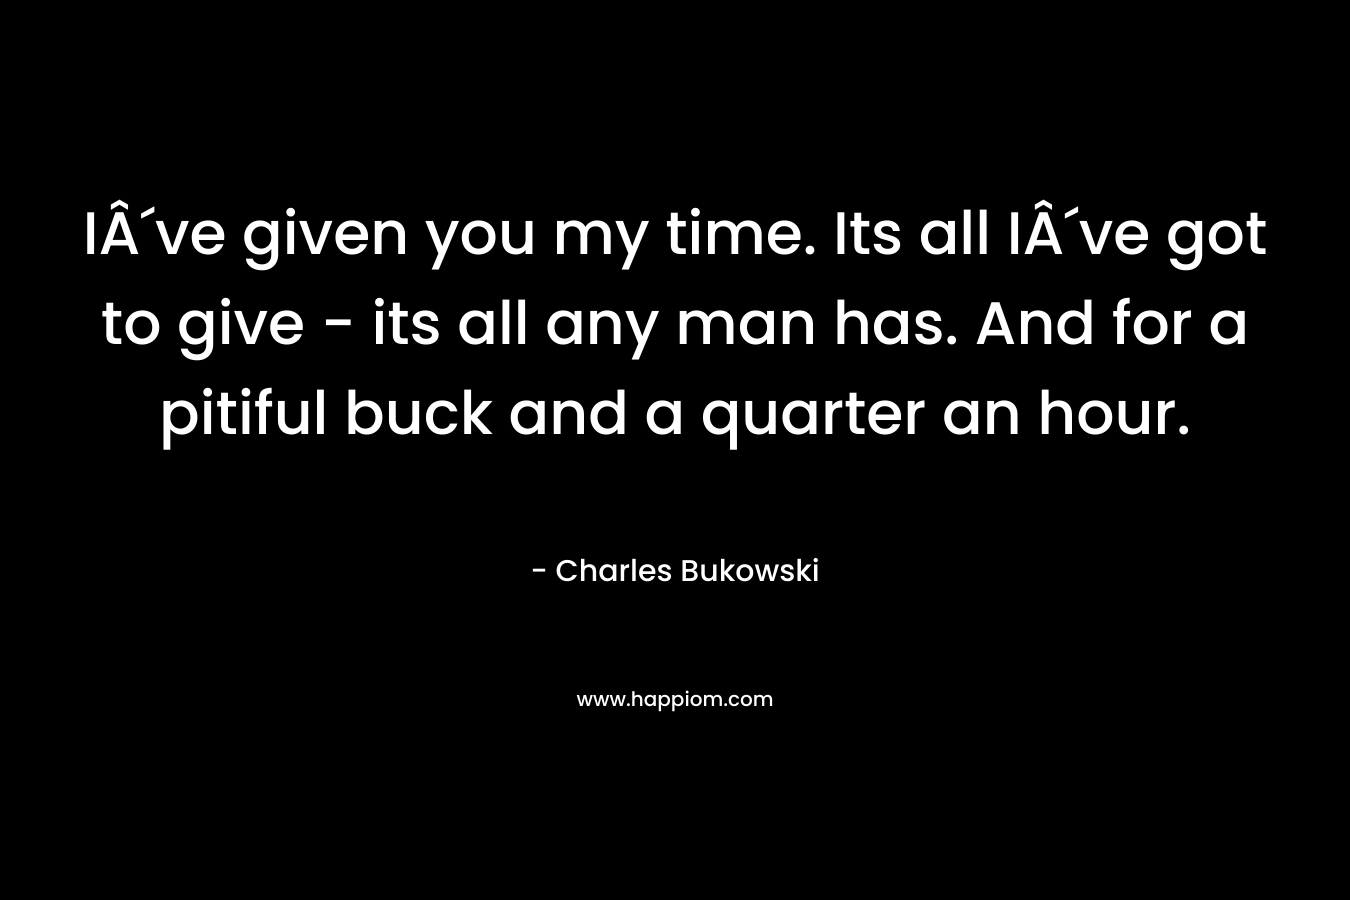 IÂ´ve given you my time. Its all IÂ´ve got to give - its all any man has. And for a pitiful buck and a quarter an hour.